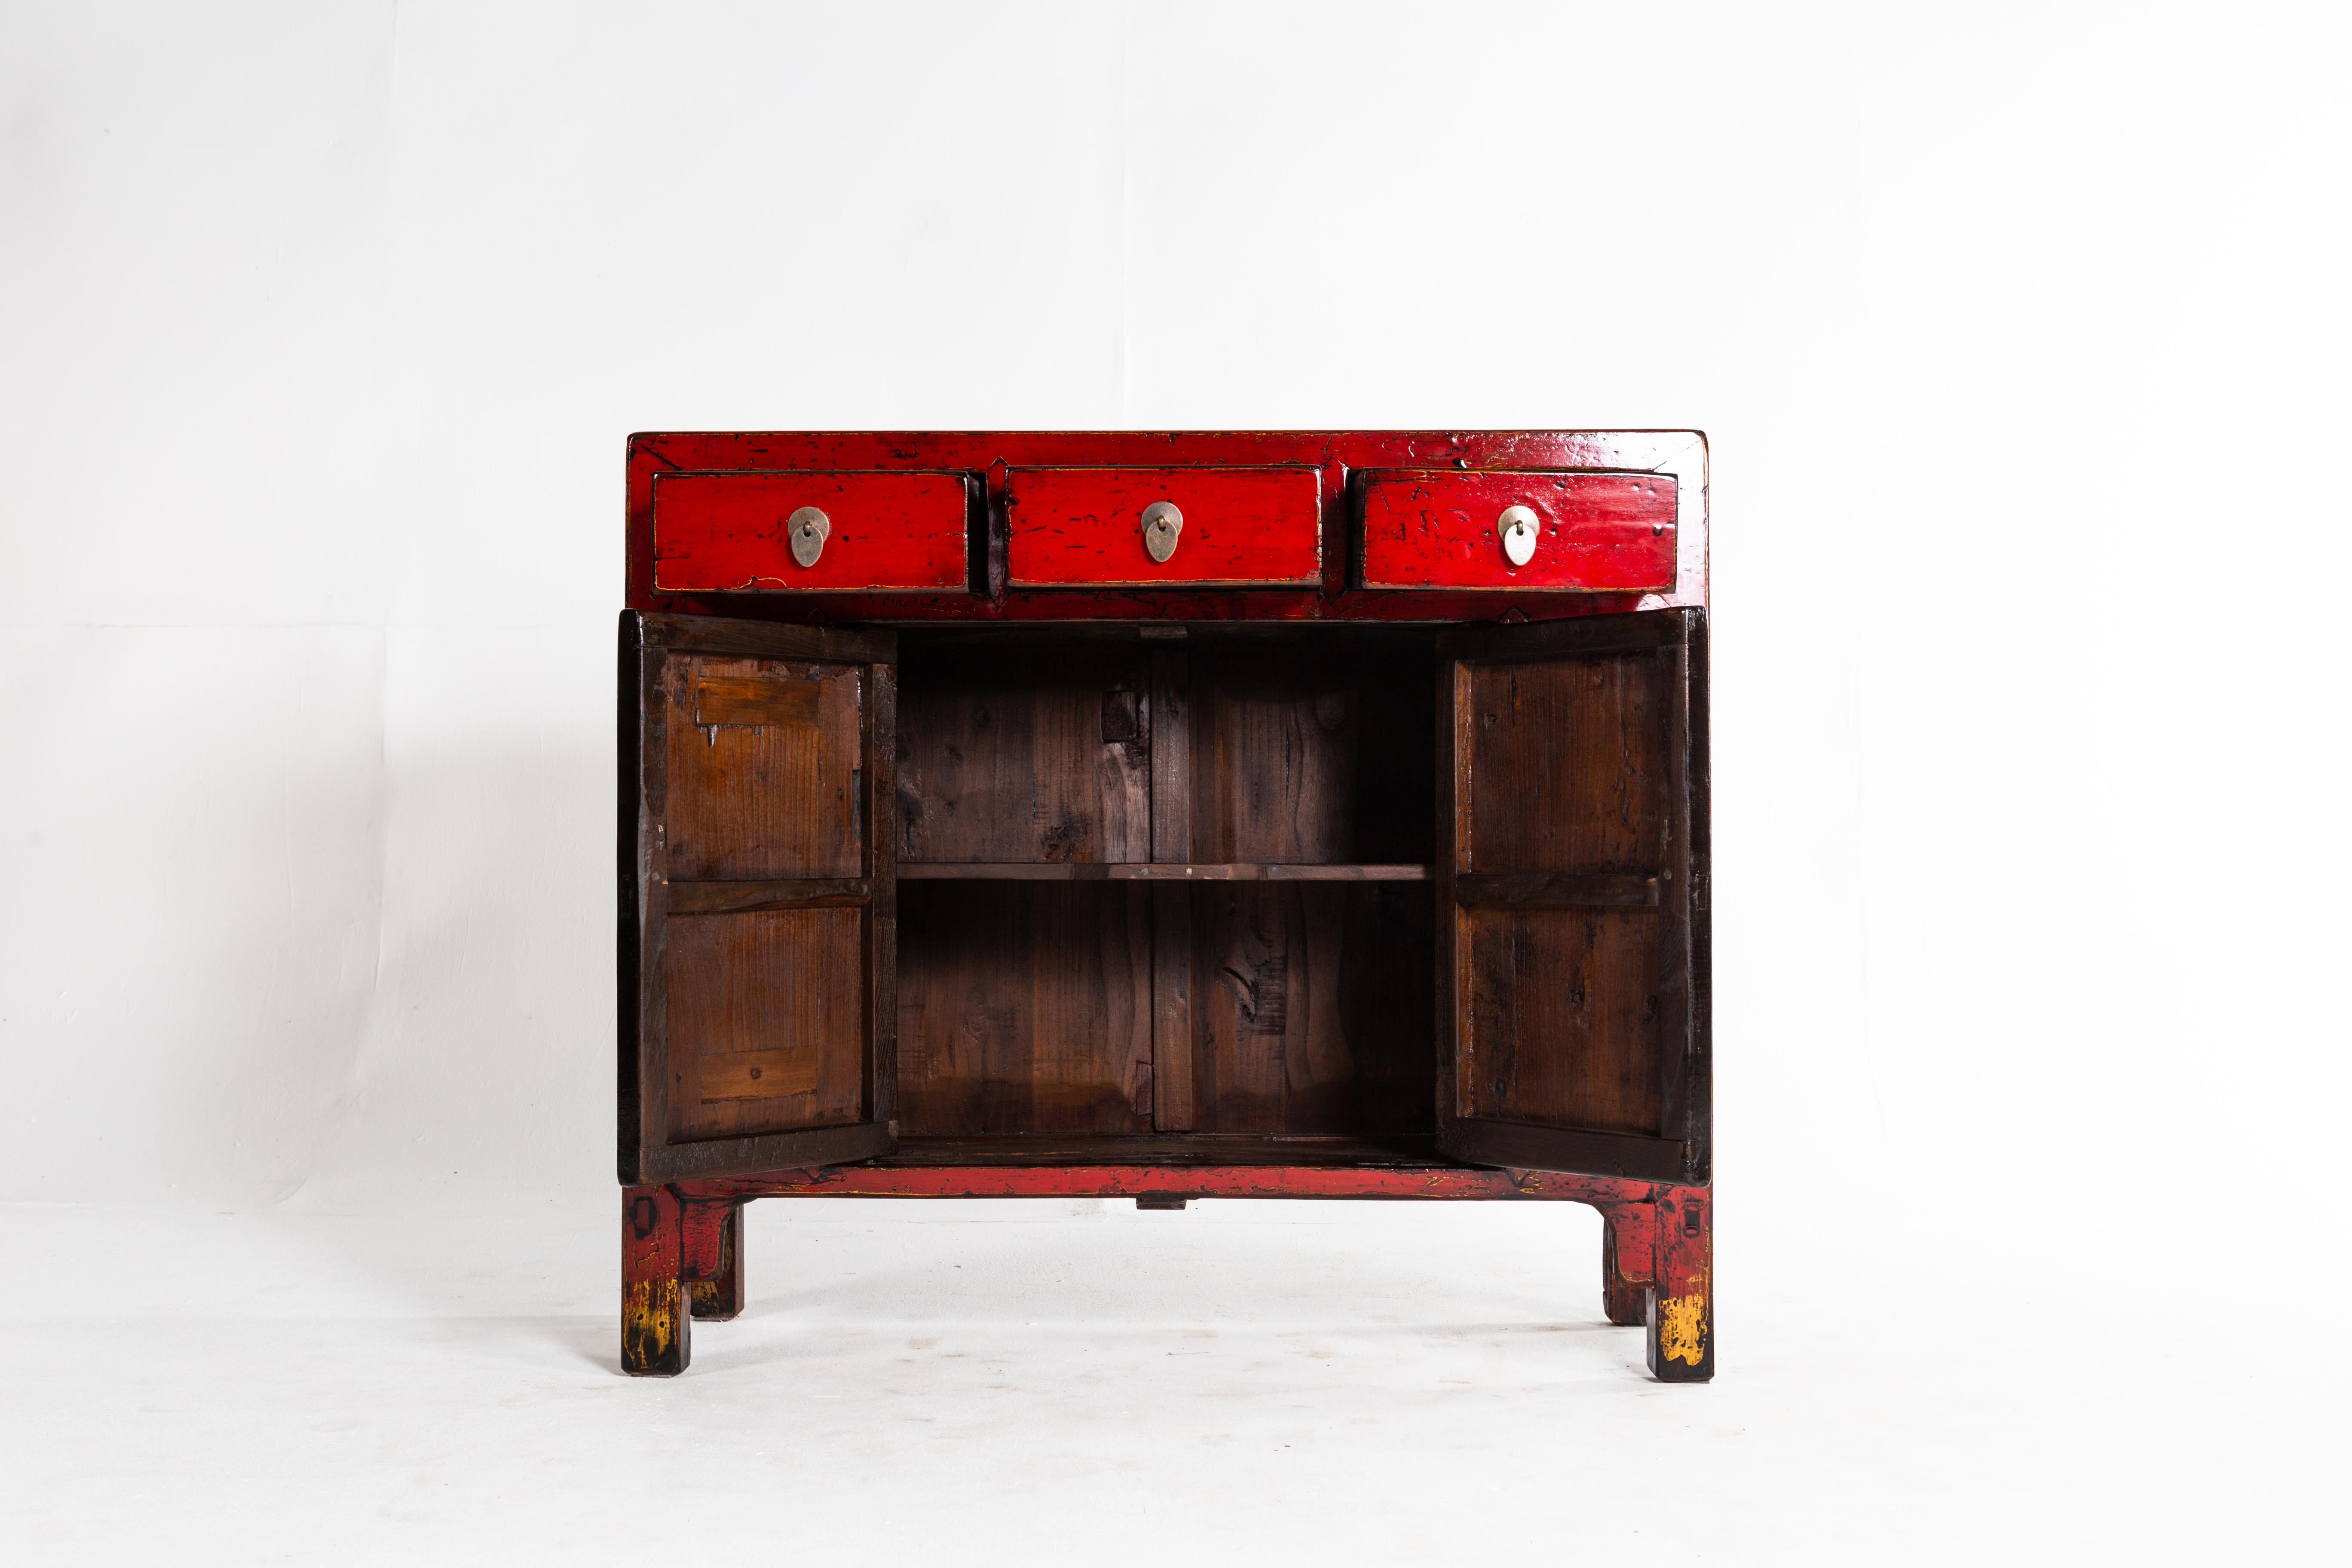 This cabinet is from Shandong, China and was made from elm, pine, and lacquer, circa 1920. The piece features 3 drawers, a pair of doors, red lacquer, and a shelf for storage. Wear consistent with age and use.